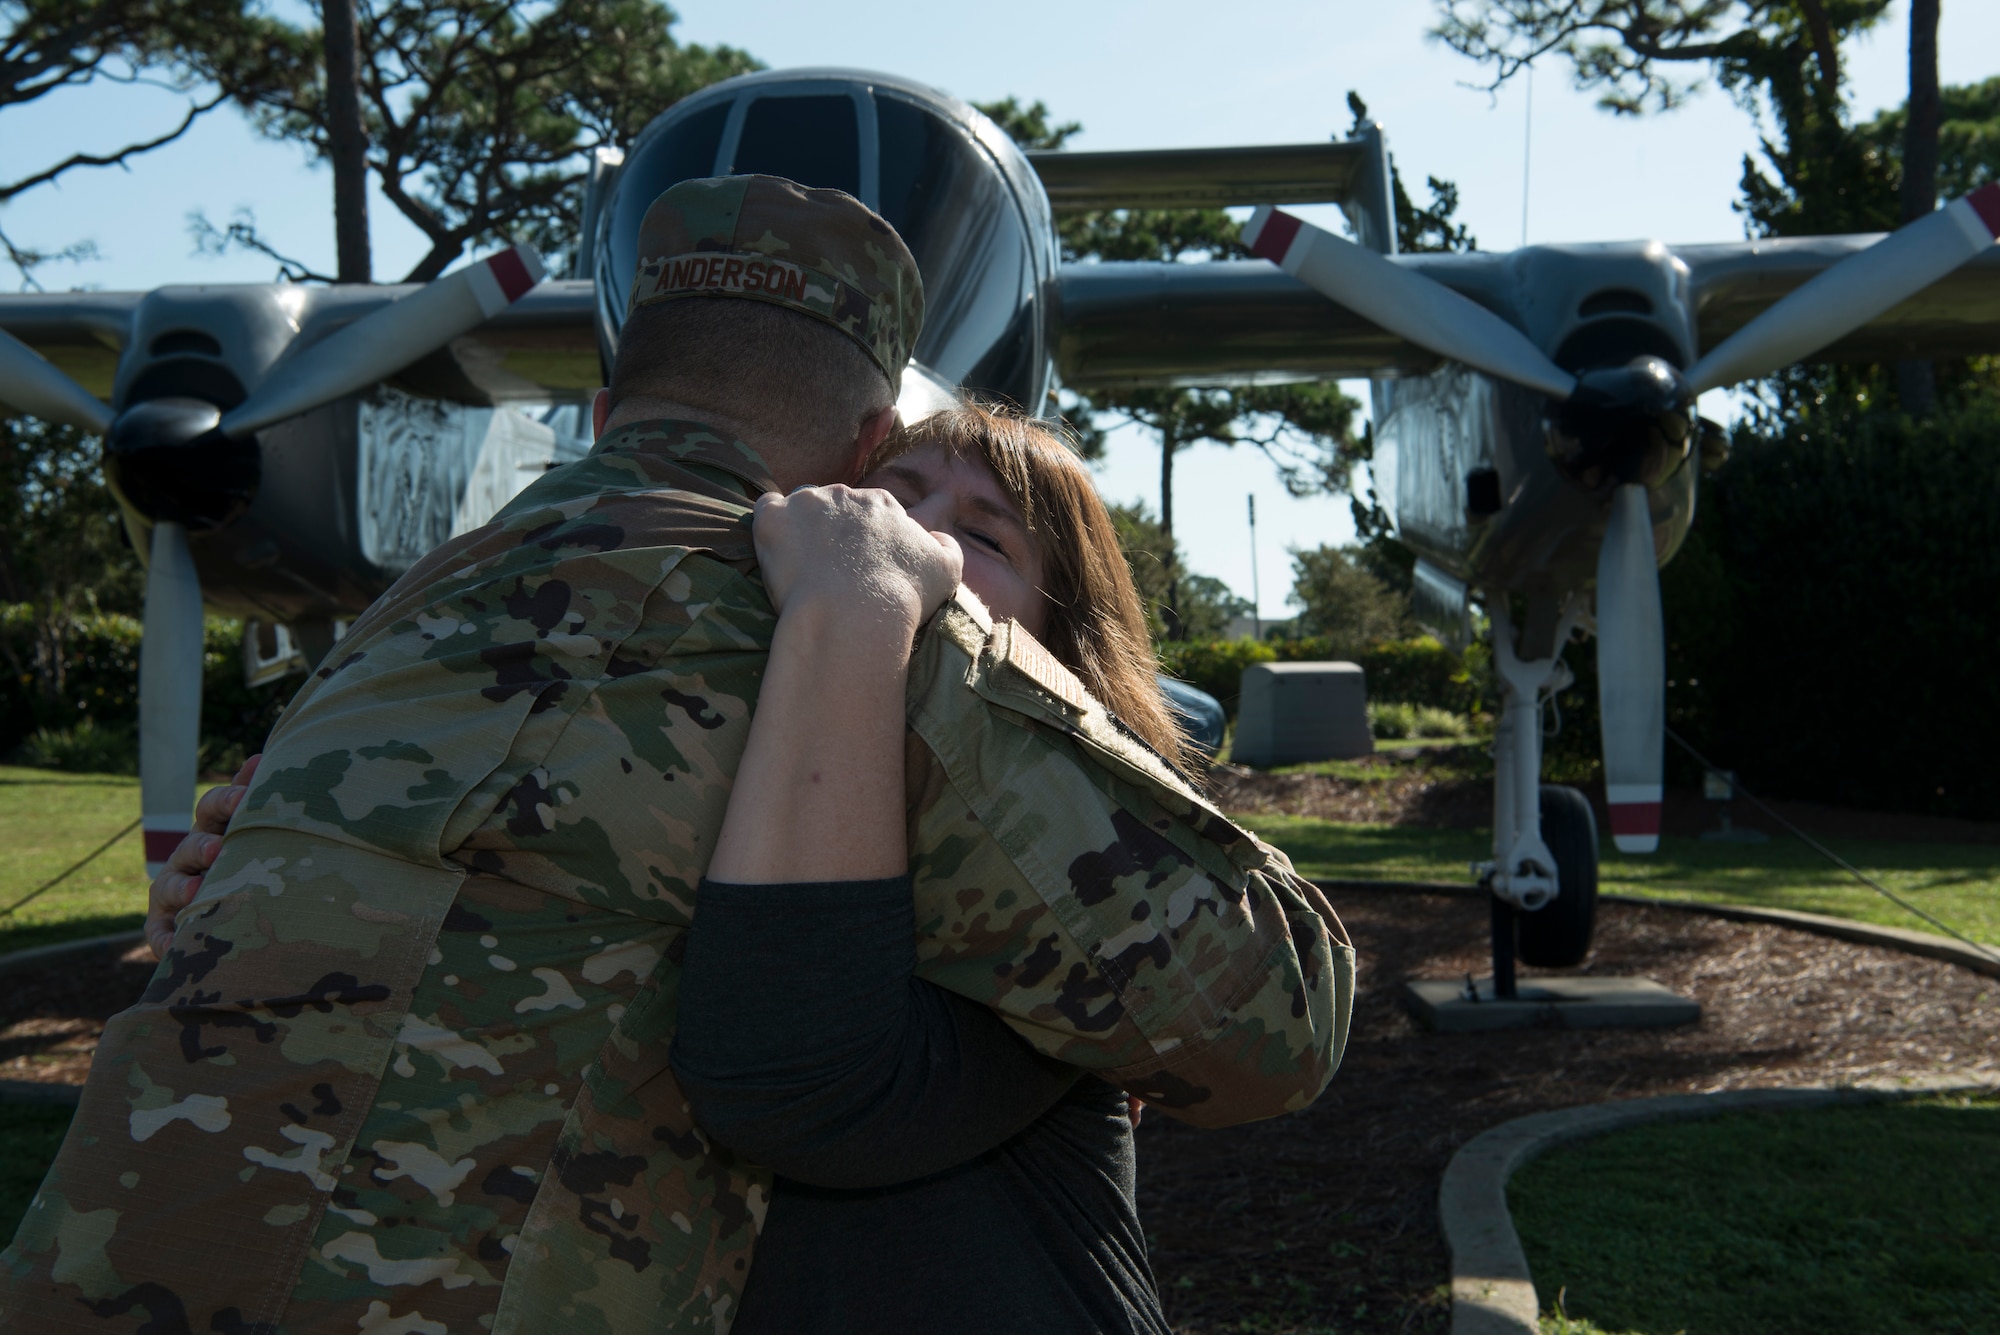 Two people sharing a hug in an airpark.